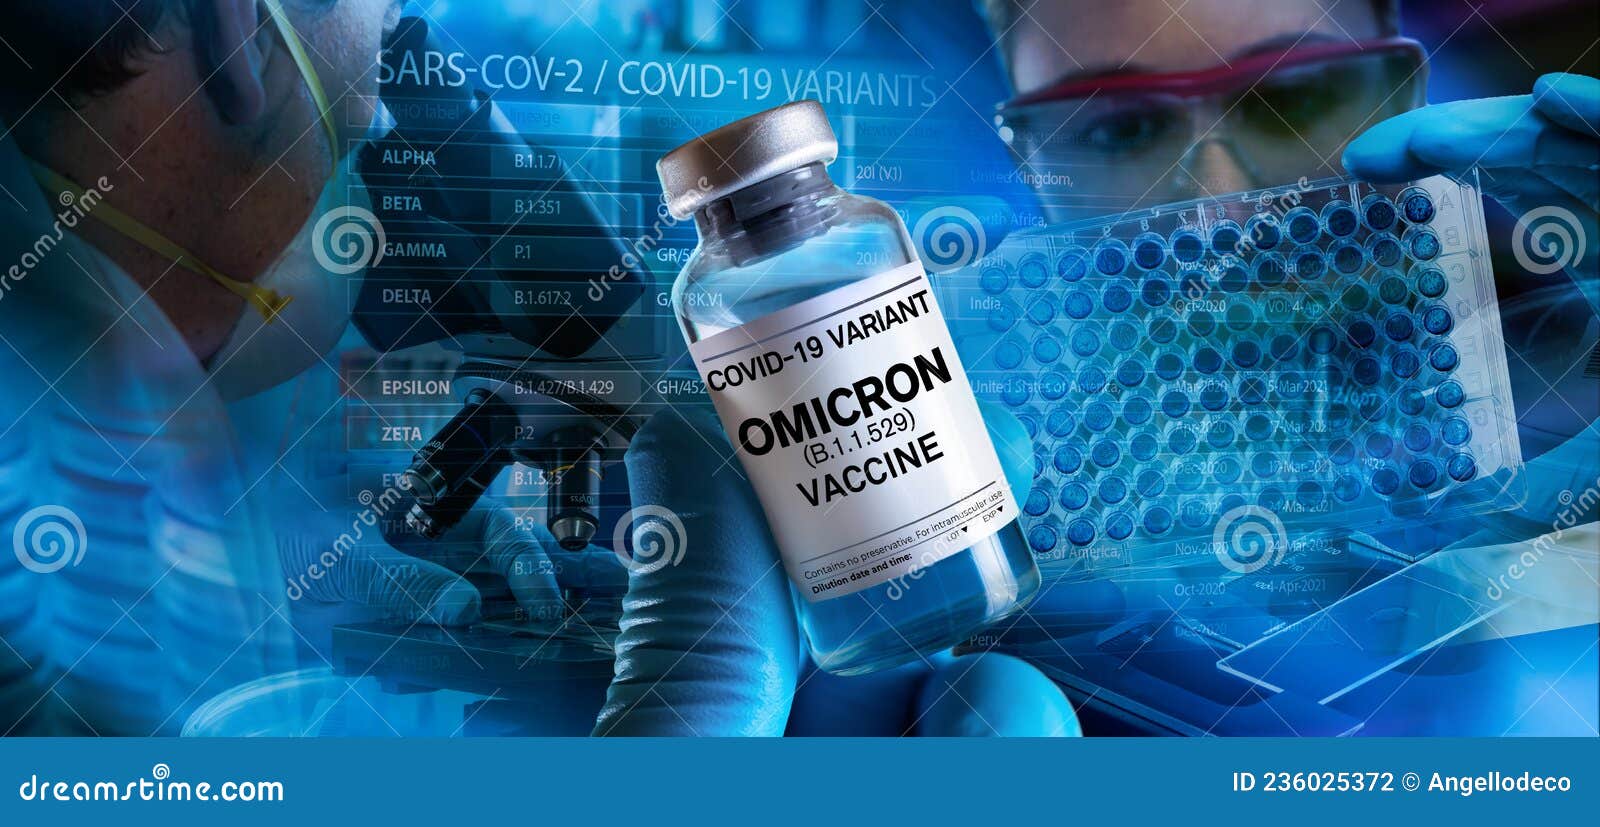 doctor hold the hand vaccine vial with doses for new variant of covid-19 omicron